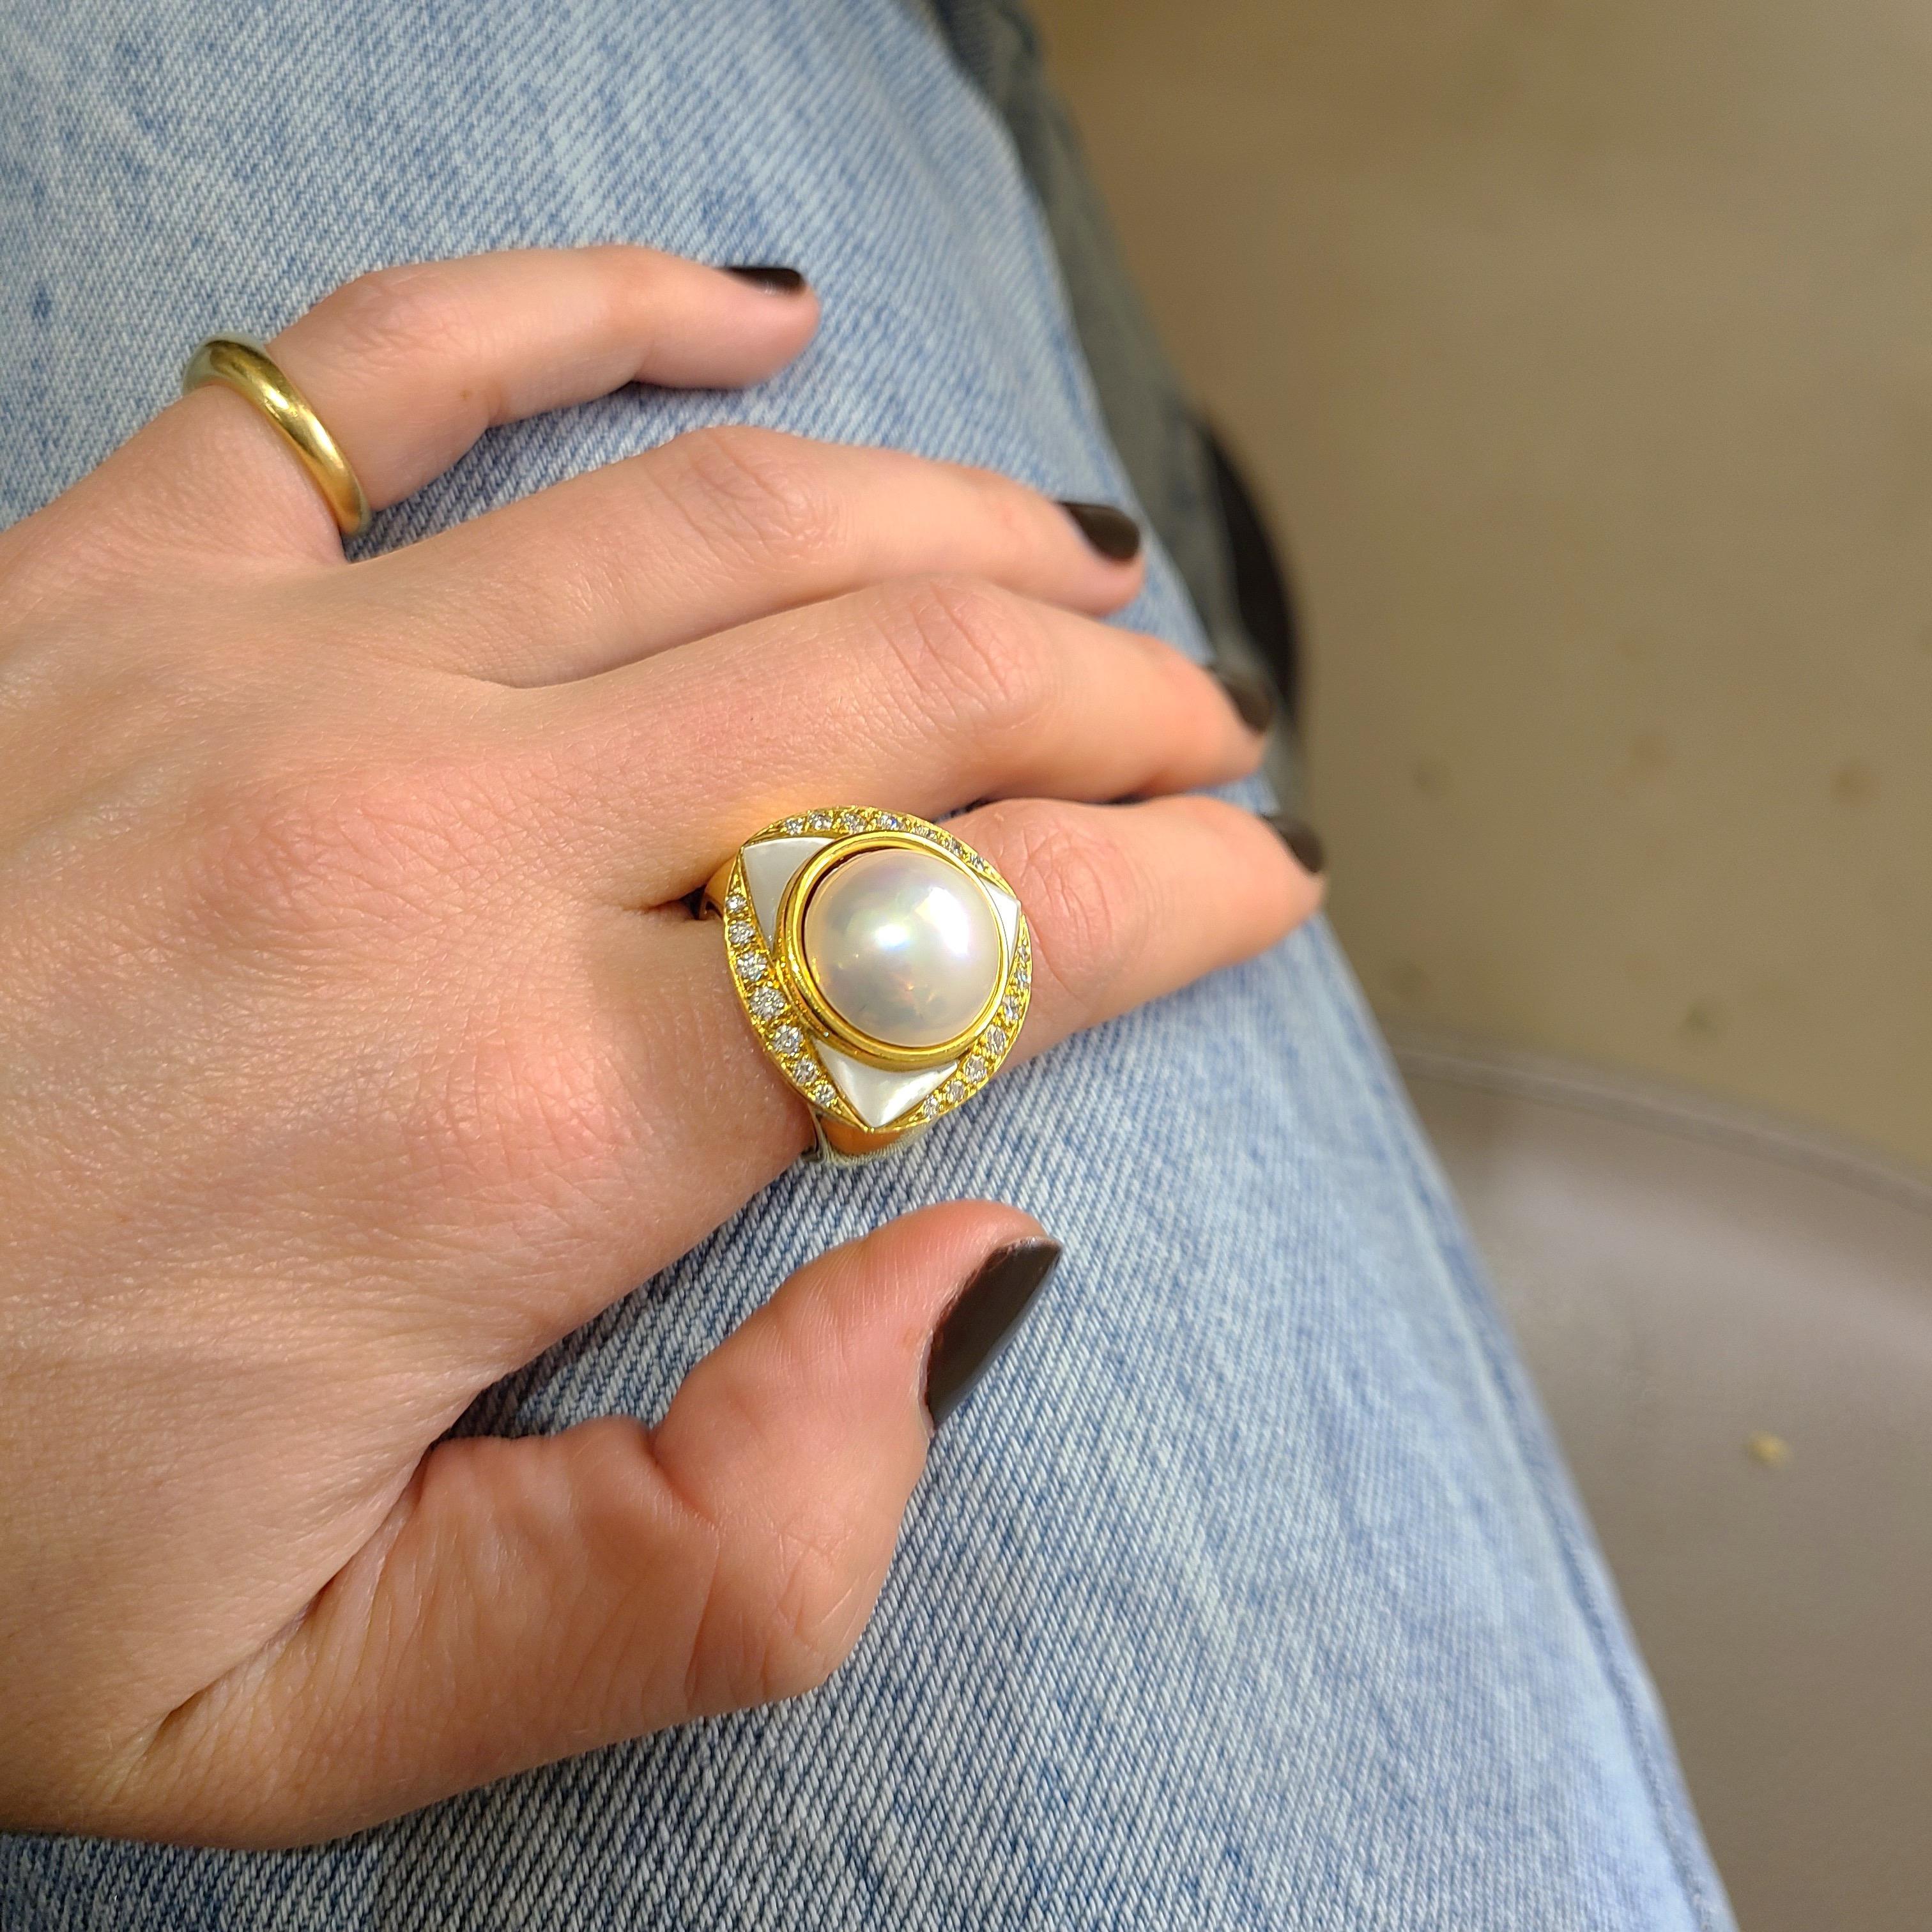 Classic and elegant best describes this 18 karat yellow gold ring. The ring centers a mabe pearl in a bezel setting. Three mother of pearl triangles along with 0.53 carats of round brilliant diamonds surround the central pearl.
Stamped 750 with the